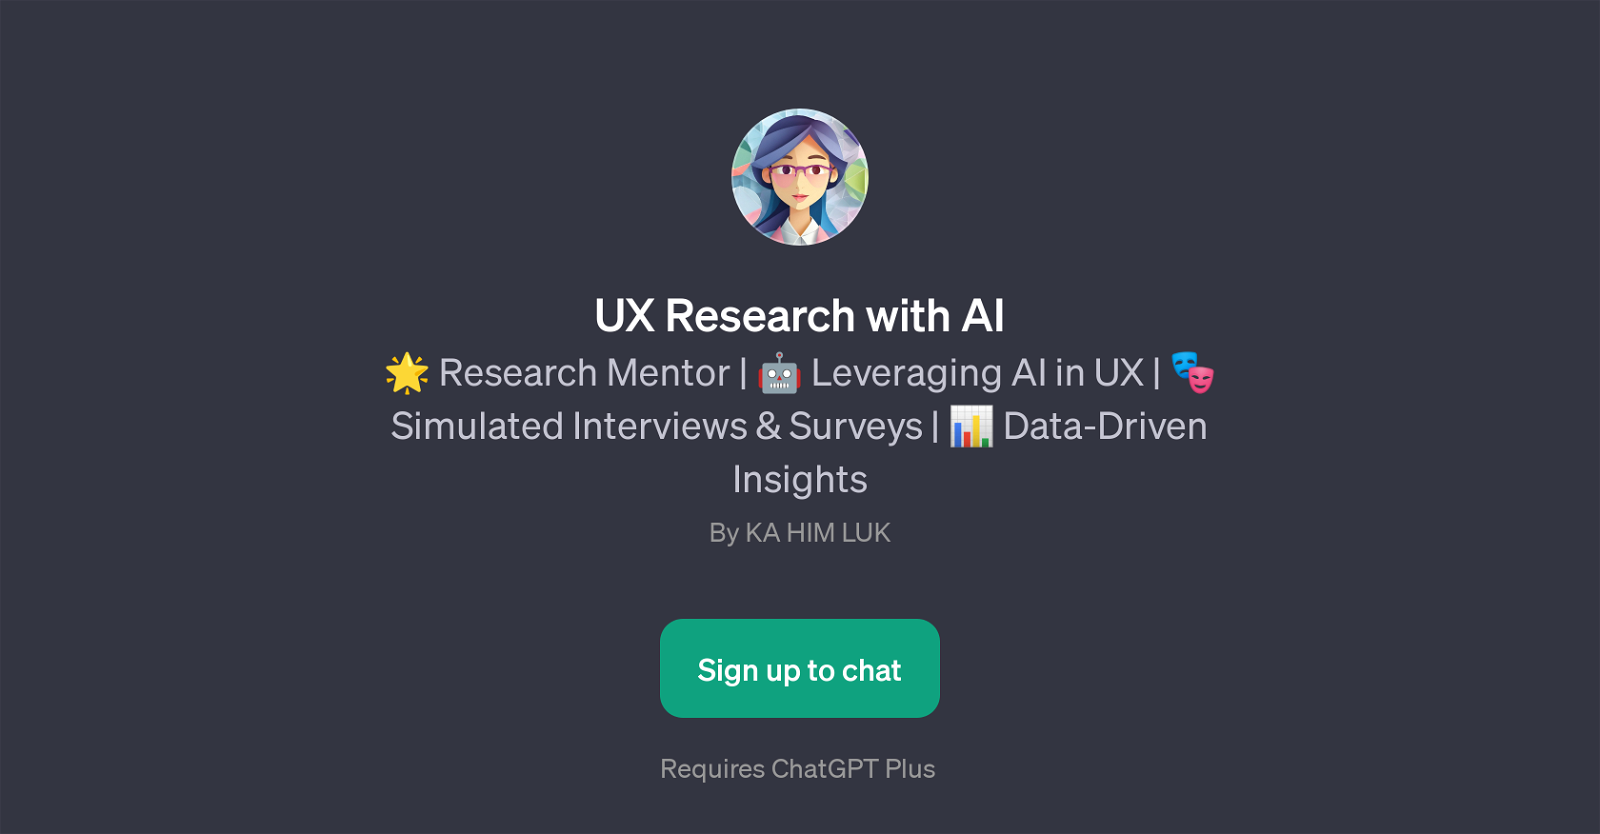 UX Research with AI website